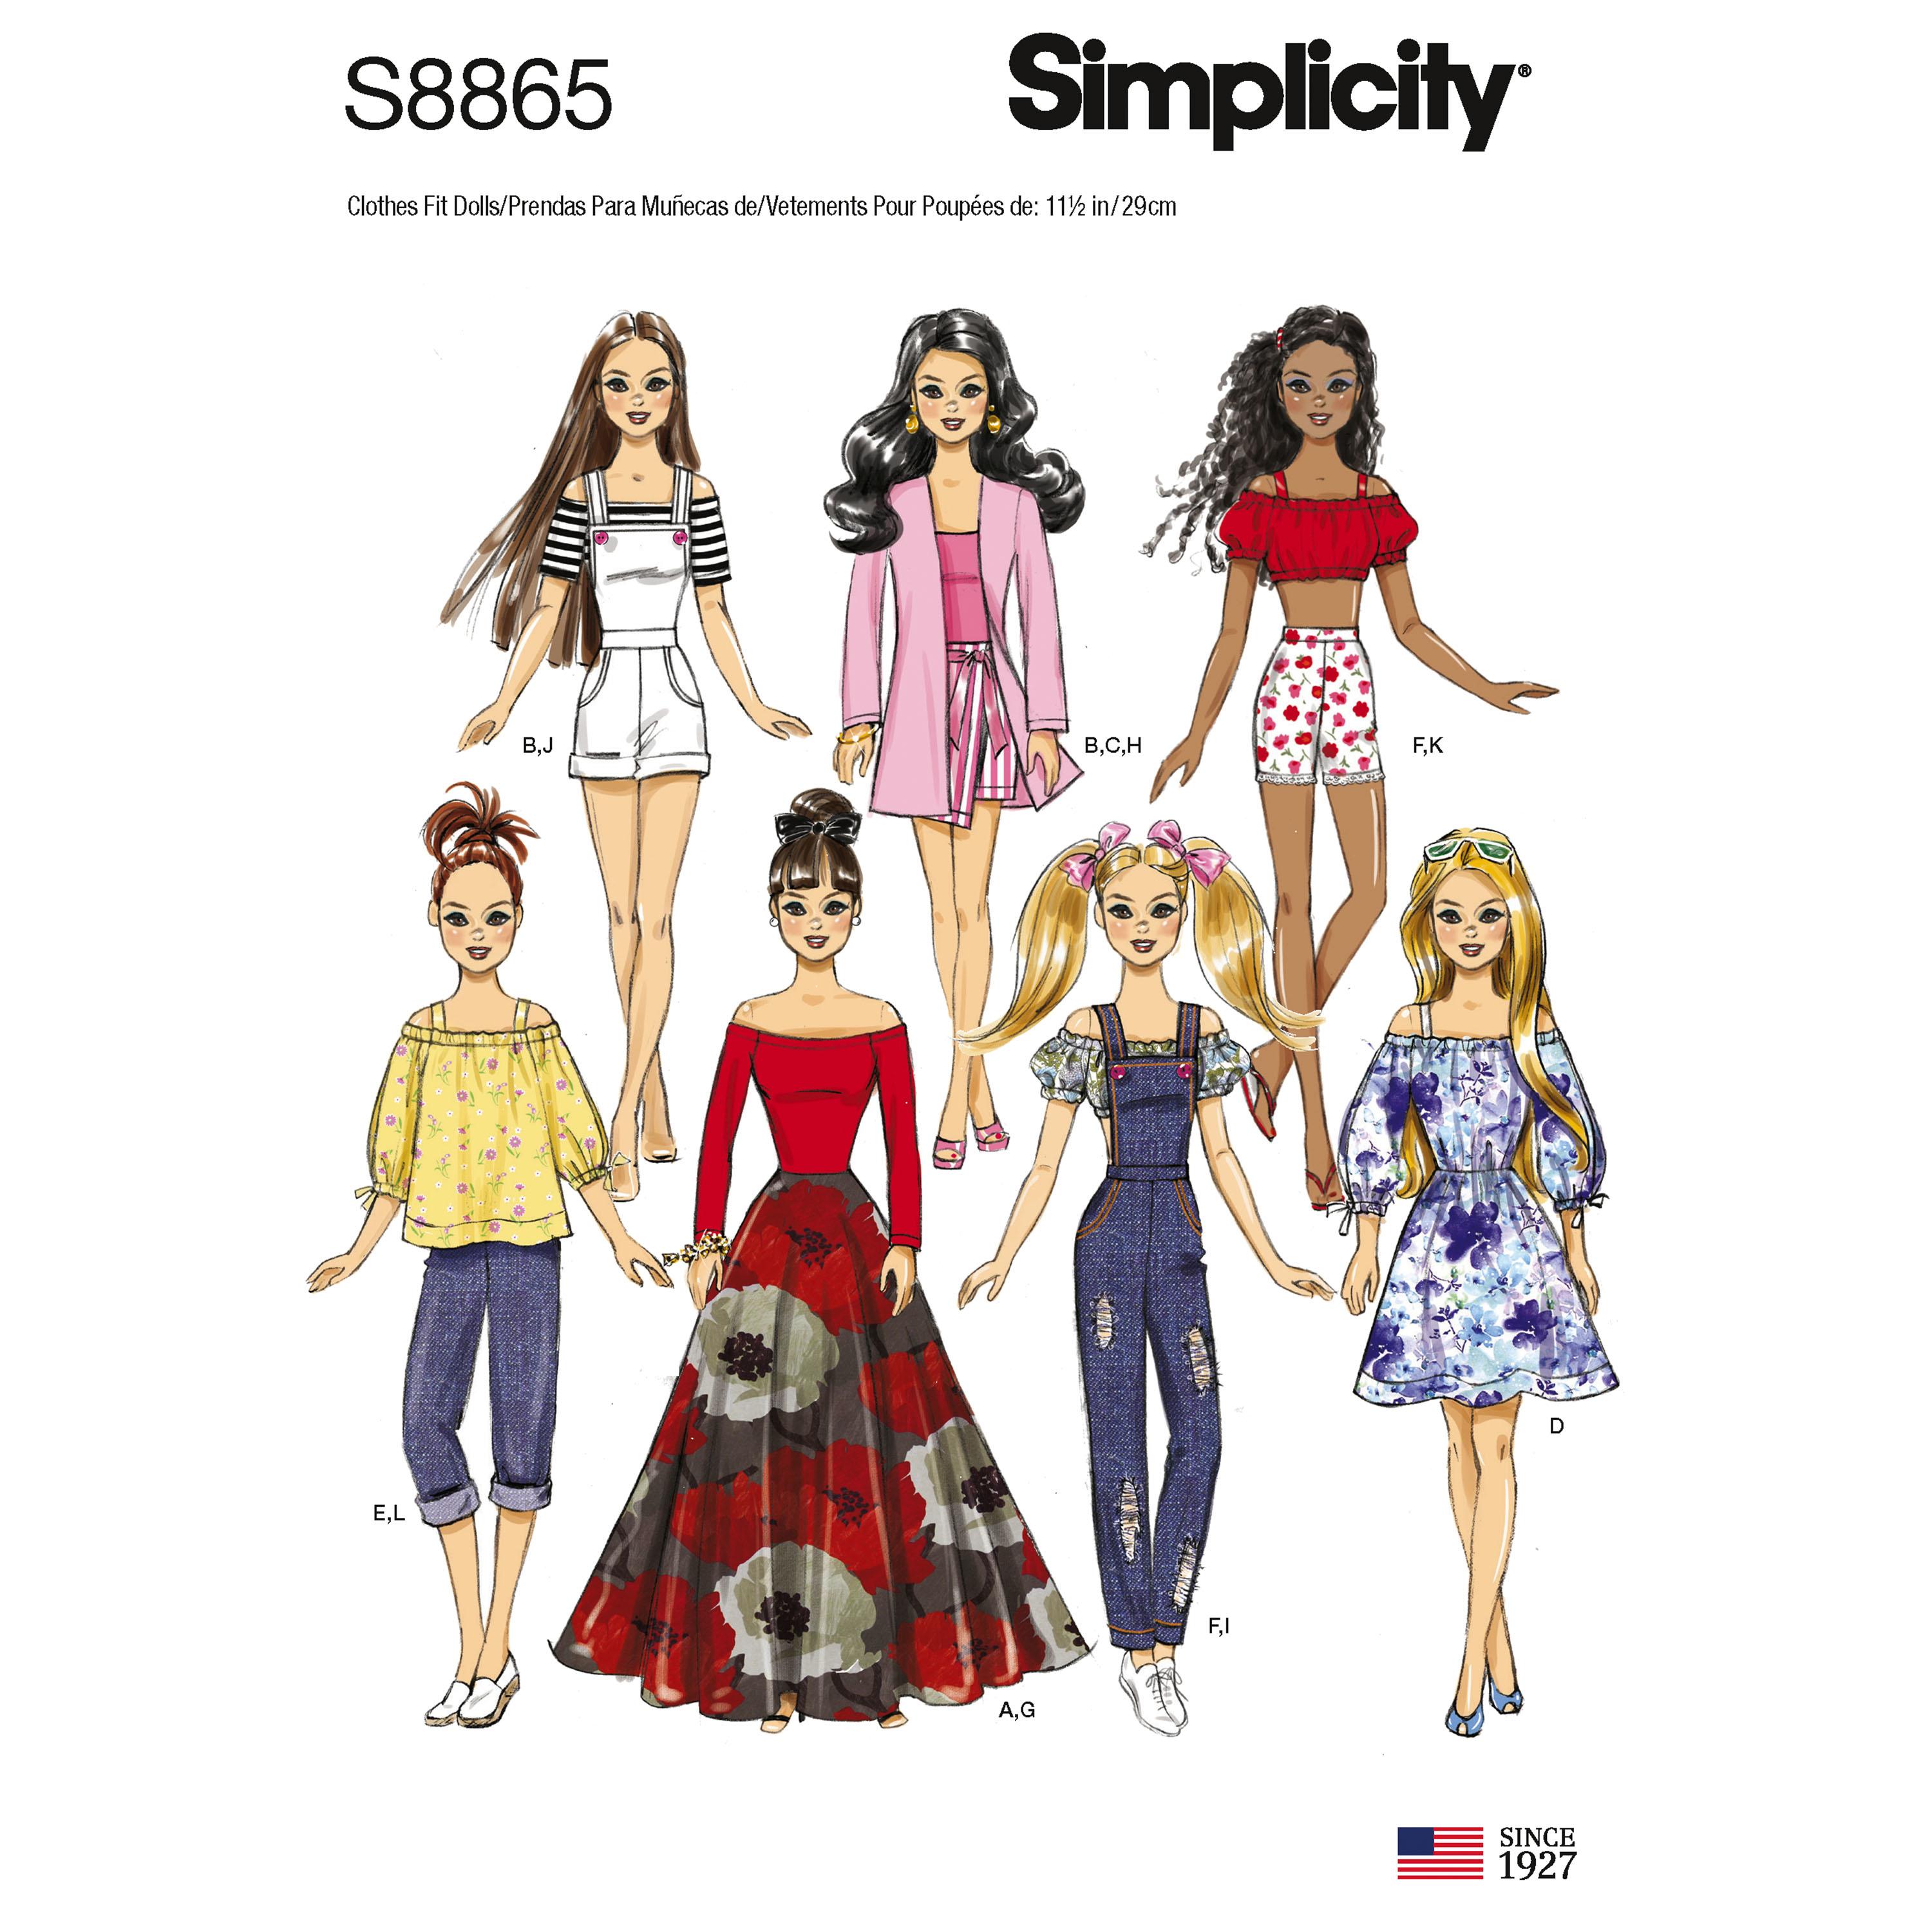 Simplicity S8865 11 1/2" Fashion Doll Clothes